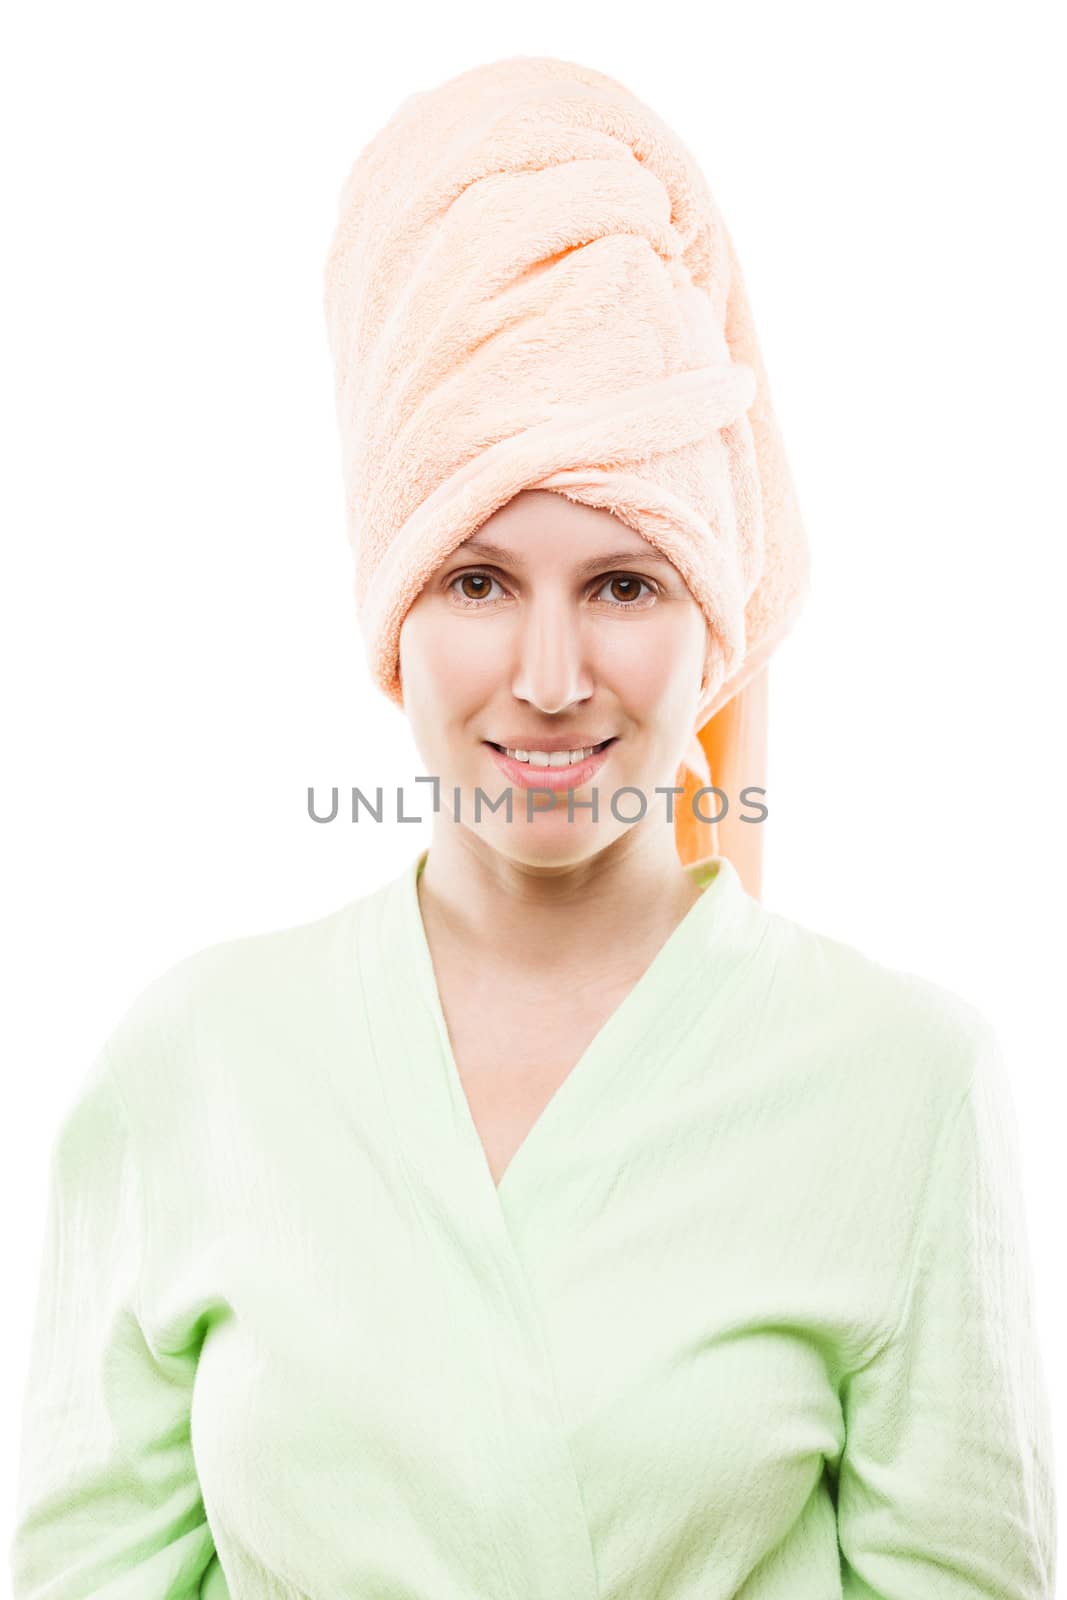 Body treatment and healthy lifestyle - beauty young smiling woman in bathrobe and curled spa towel on head white isolated